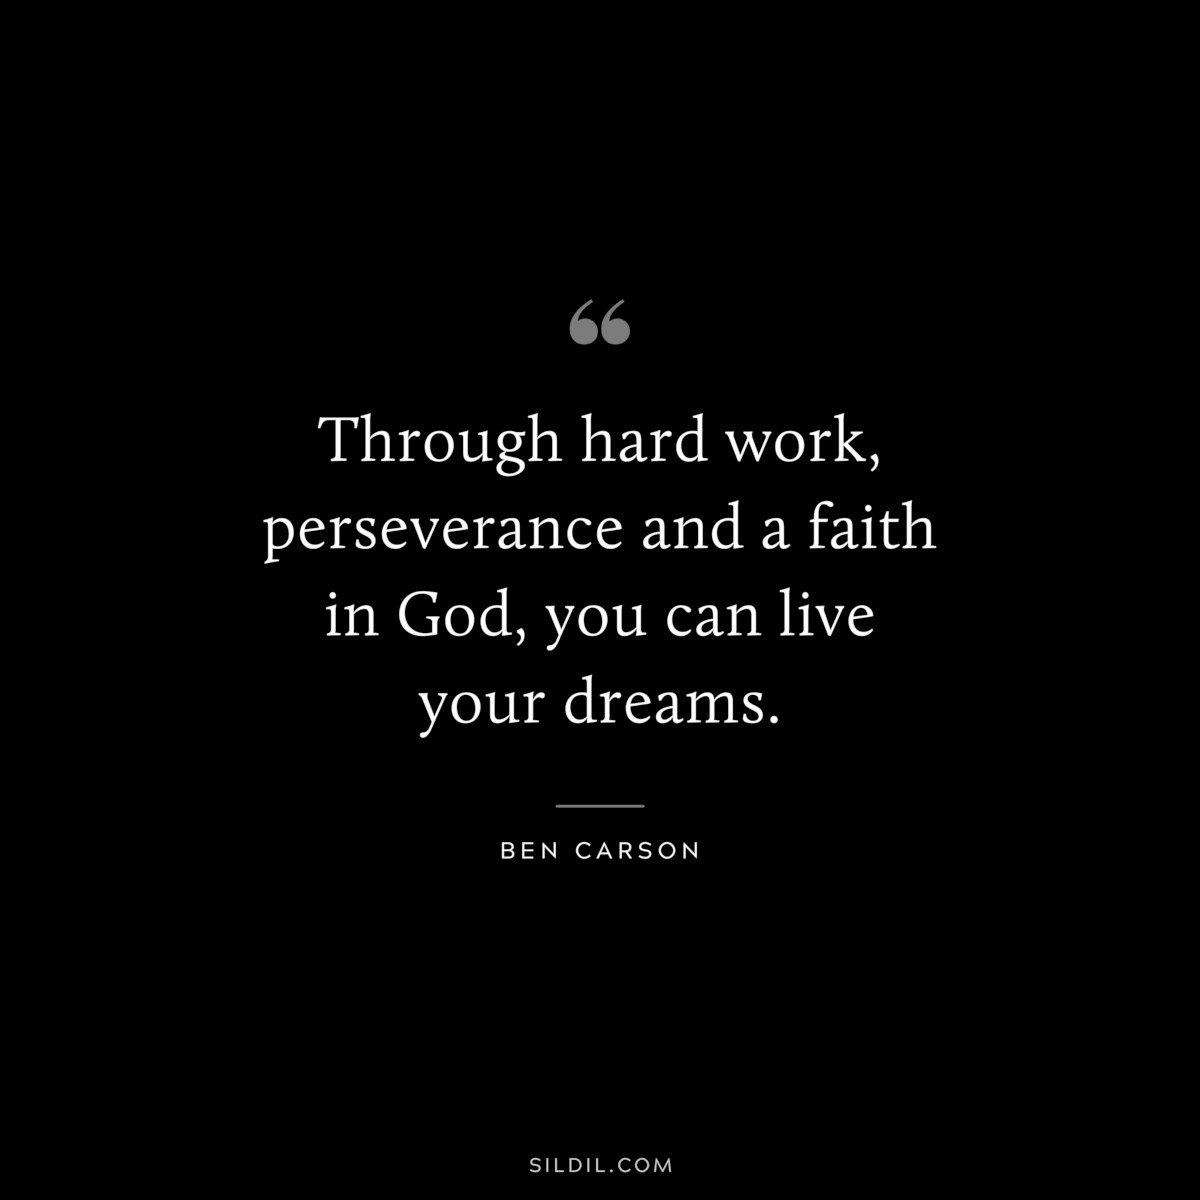 Through hard work, perseverance and a faith in God, you can live your dreams. ― Ben Carson